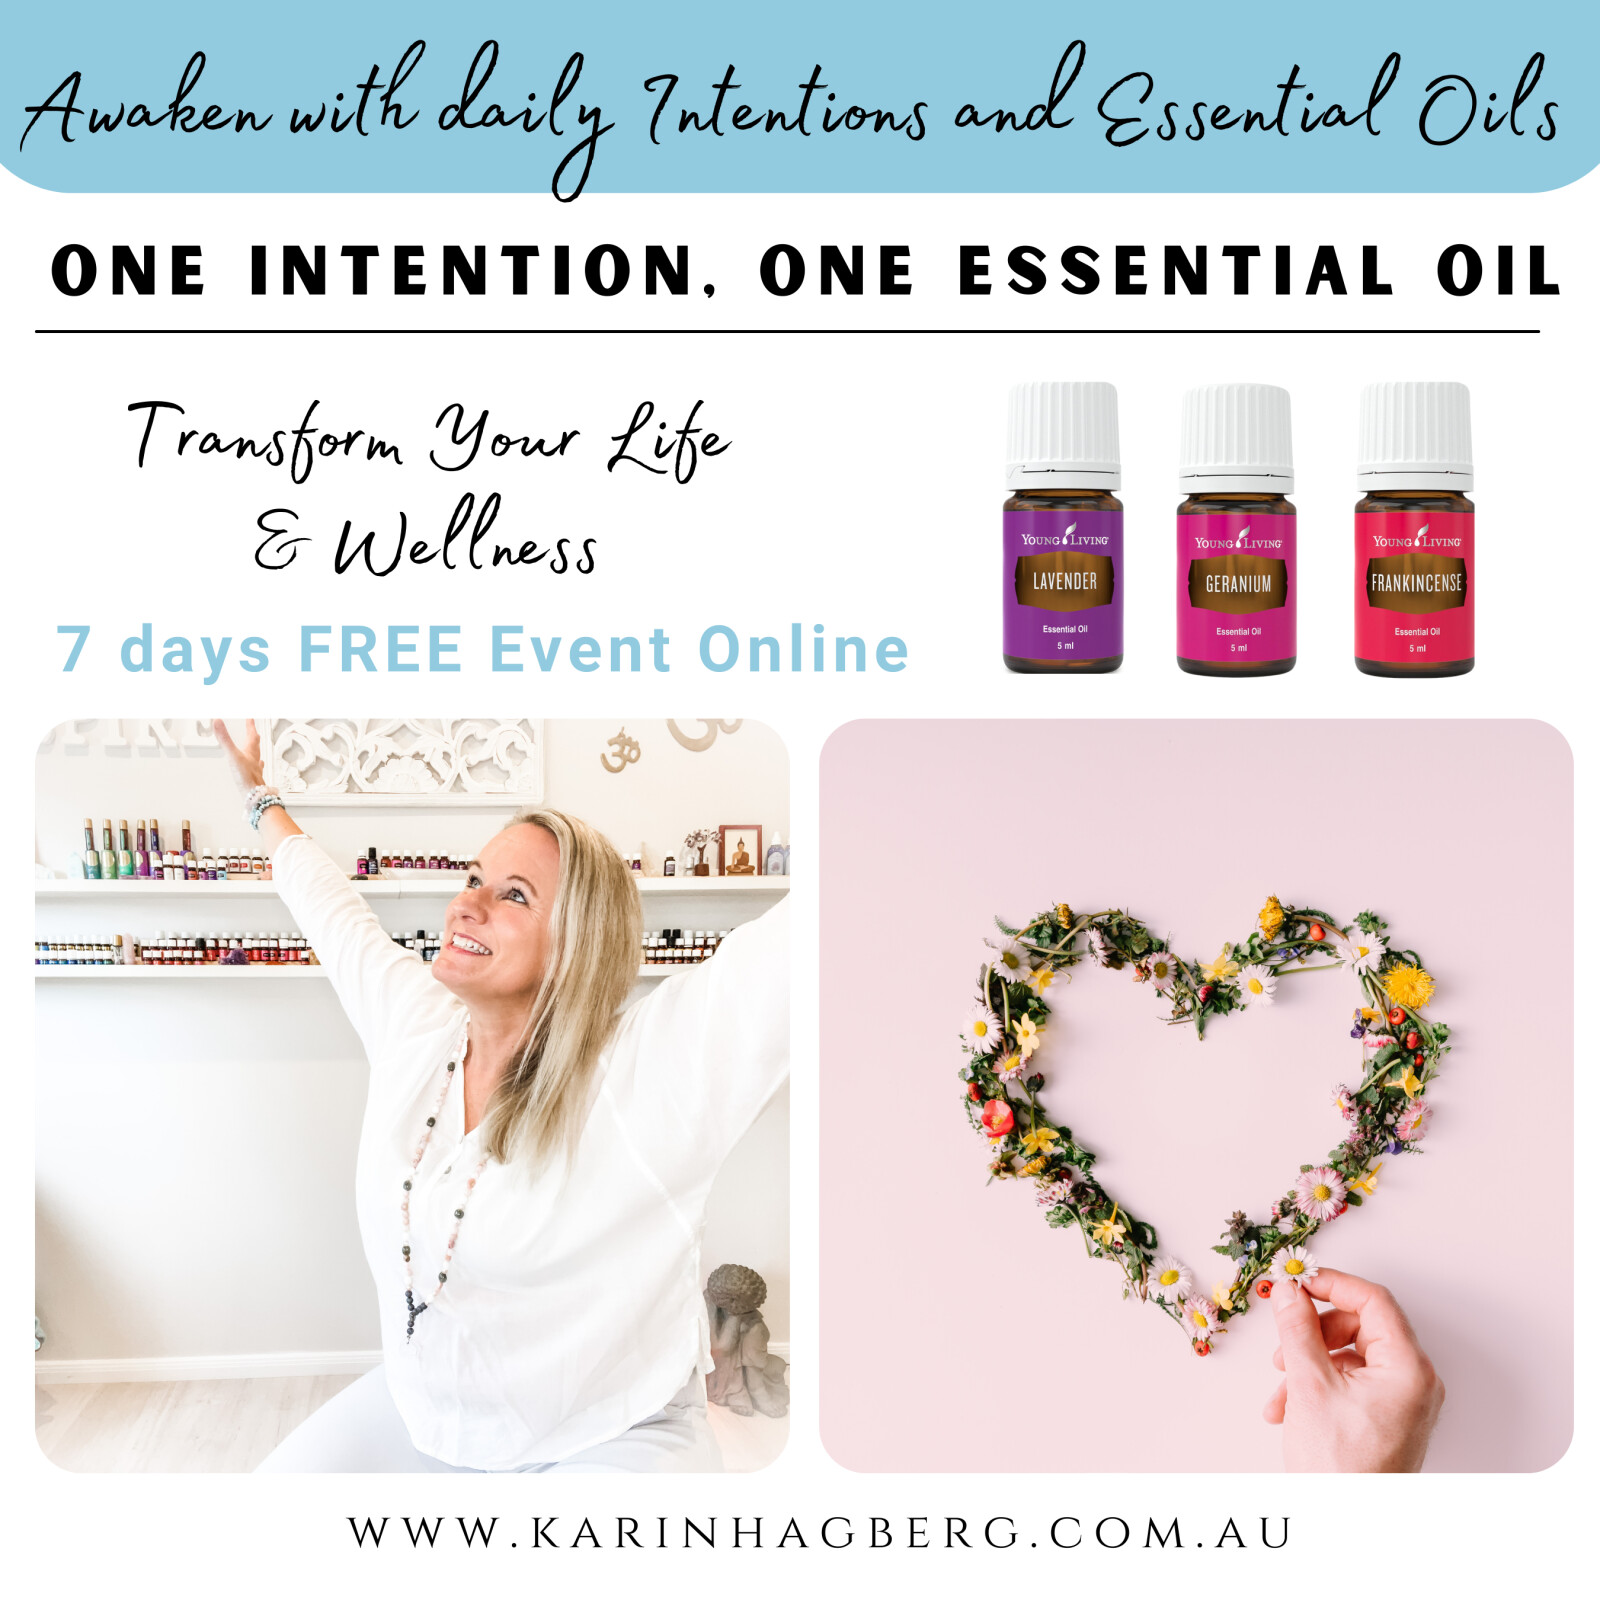 Awaken with Daily Intentions and Essential Oils 